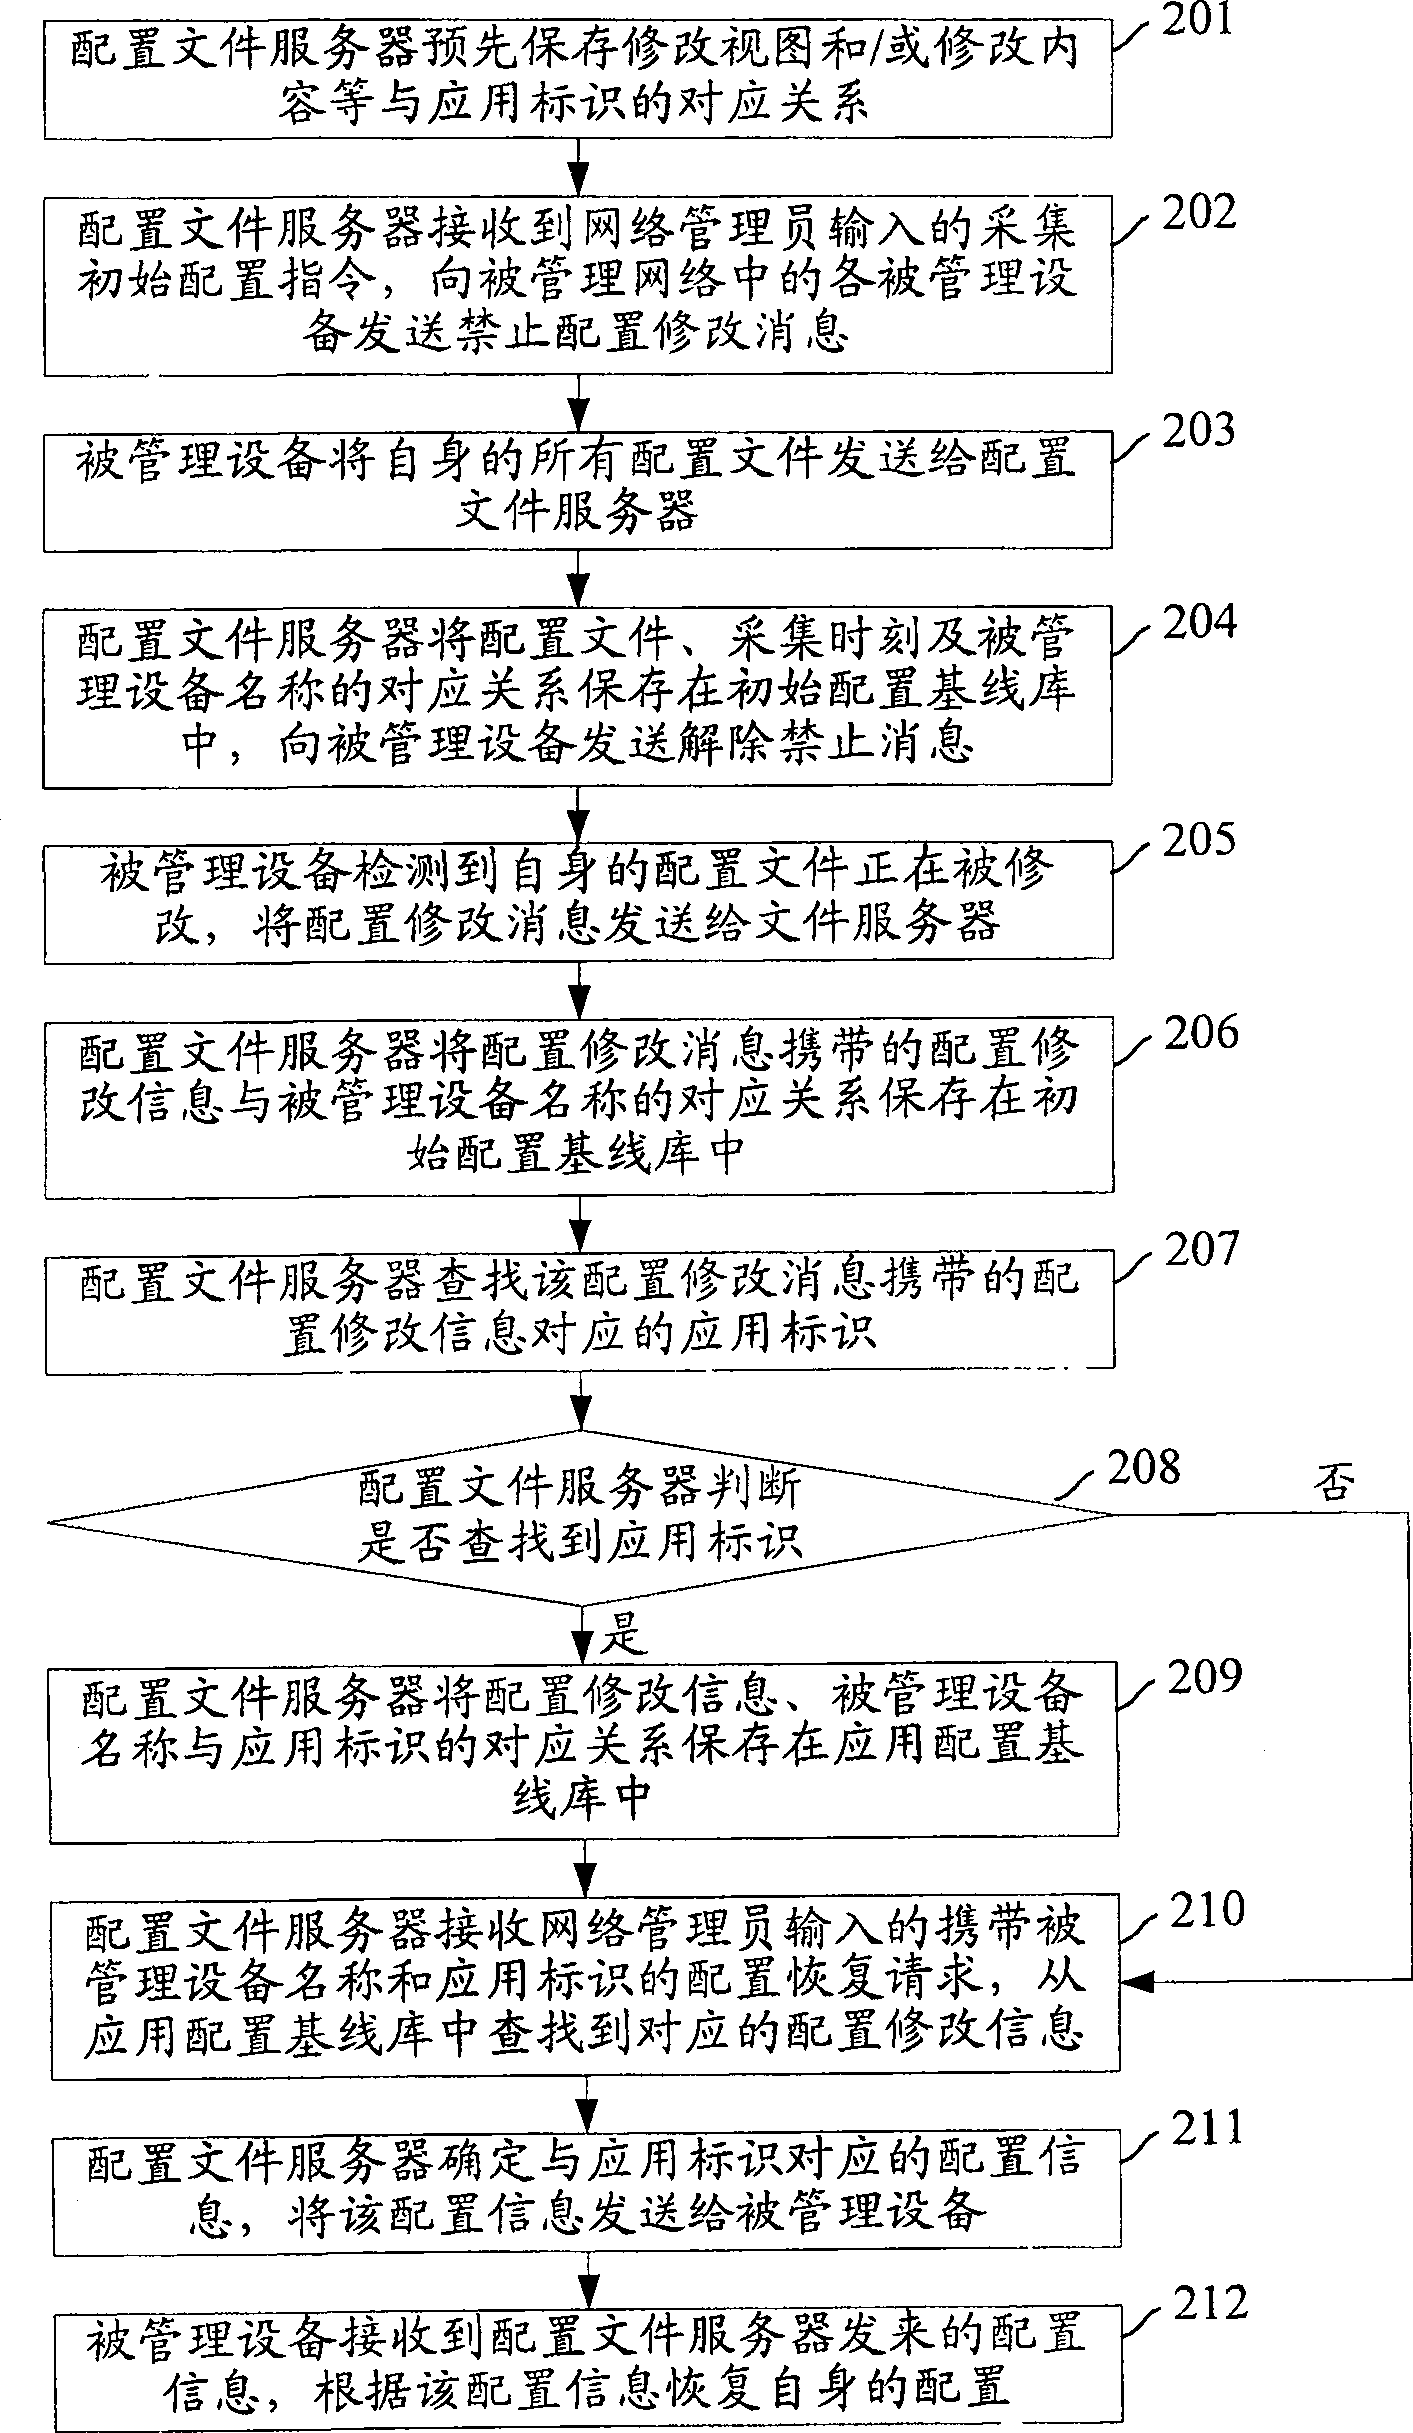 Configuration backup method, system and configuration file server and managed devices